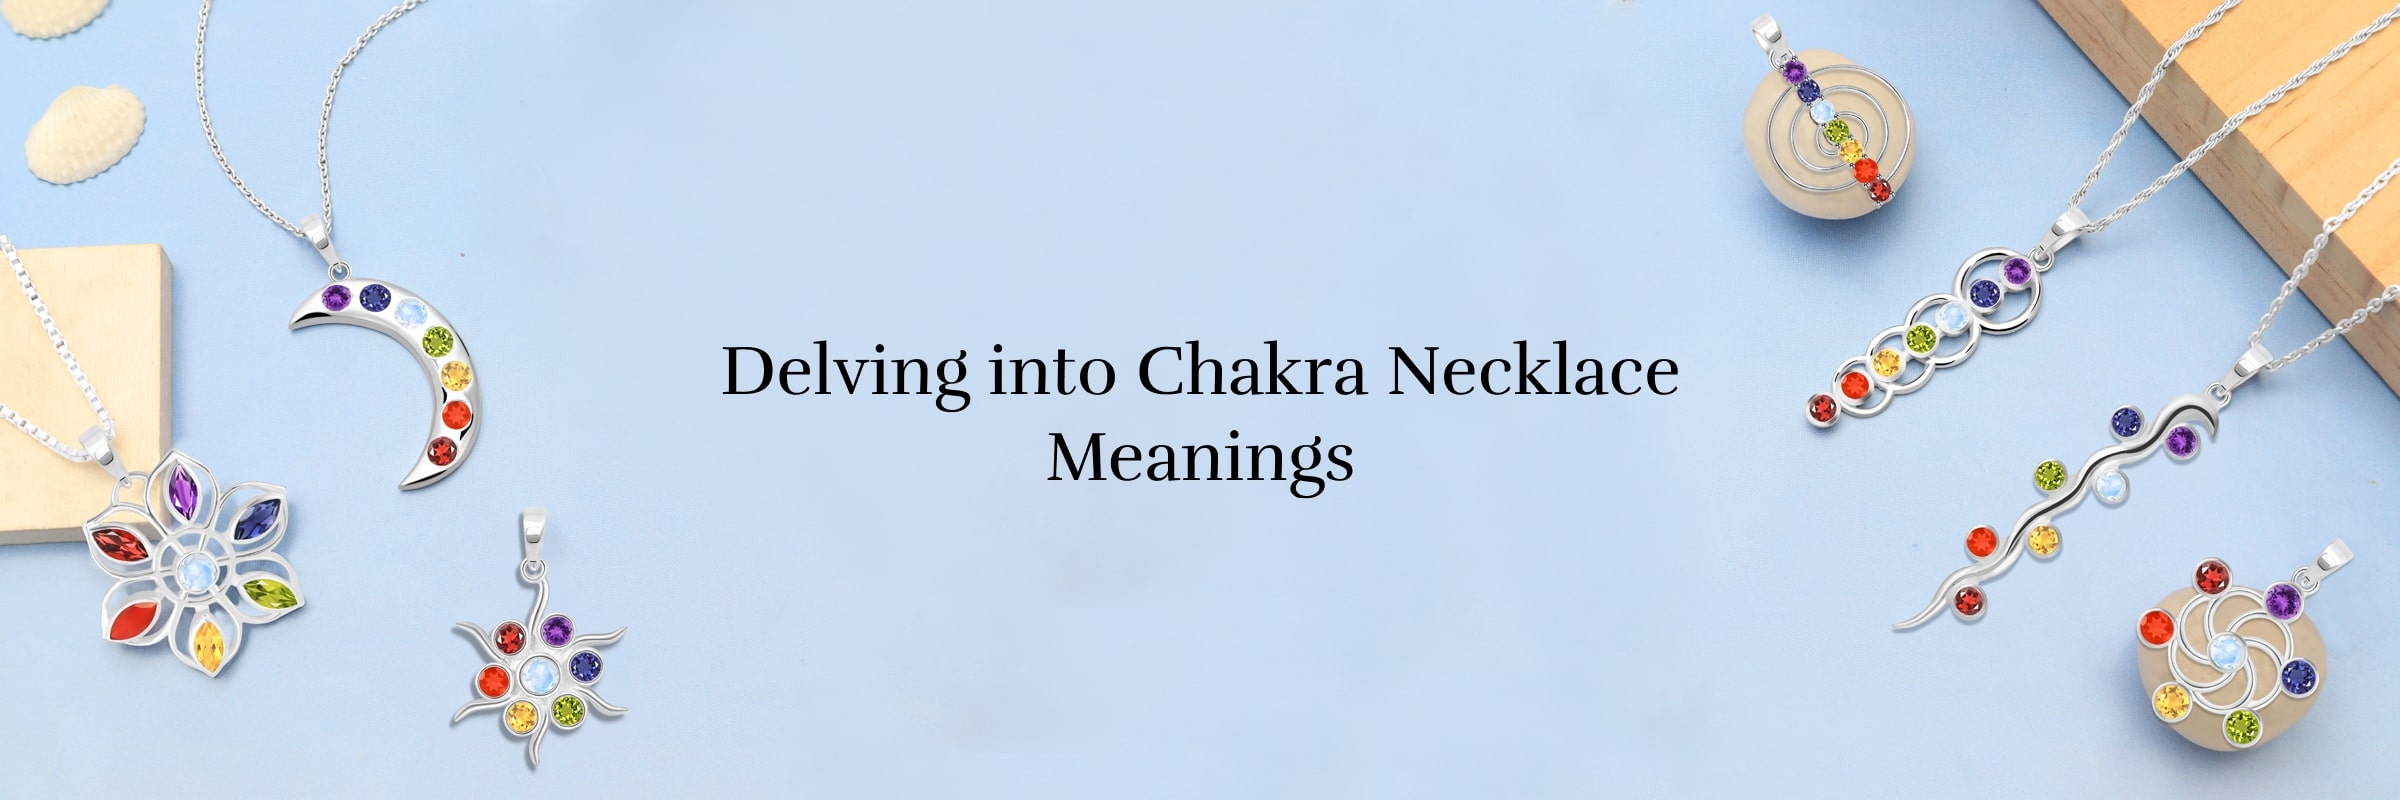 Meaning of Chakra Necklace